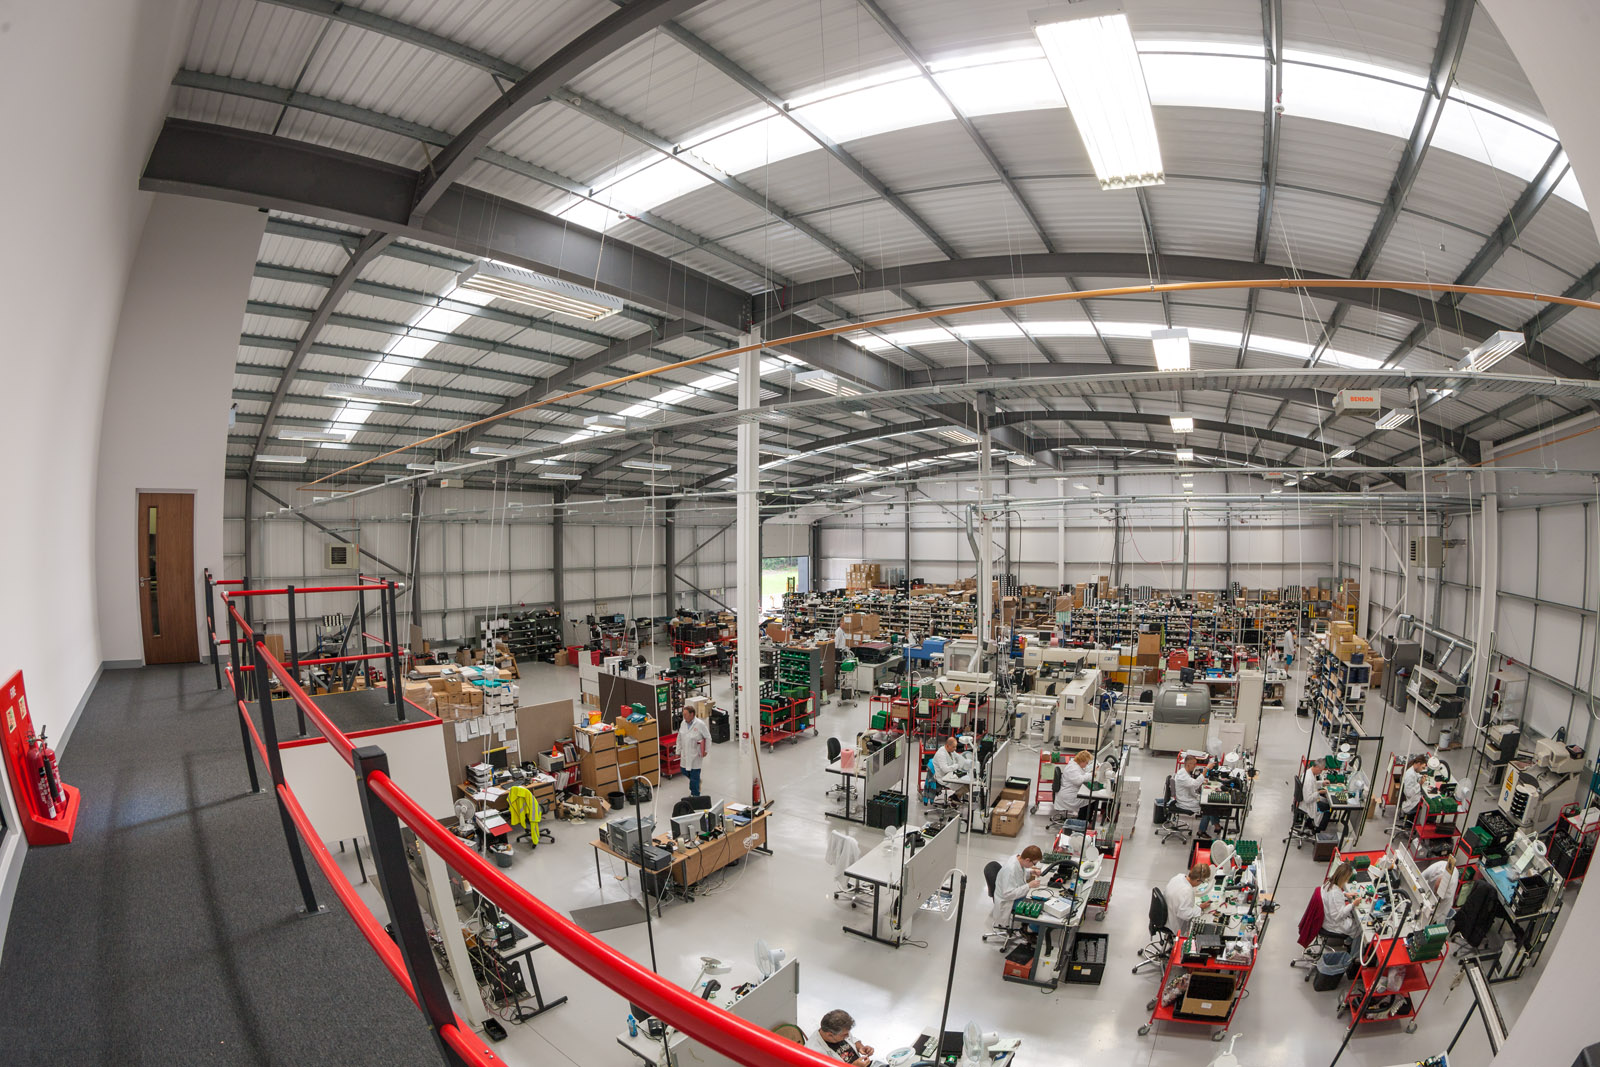 View of factory, a wide view, fish-eye lens